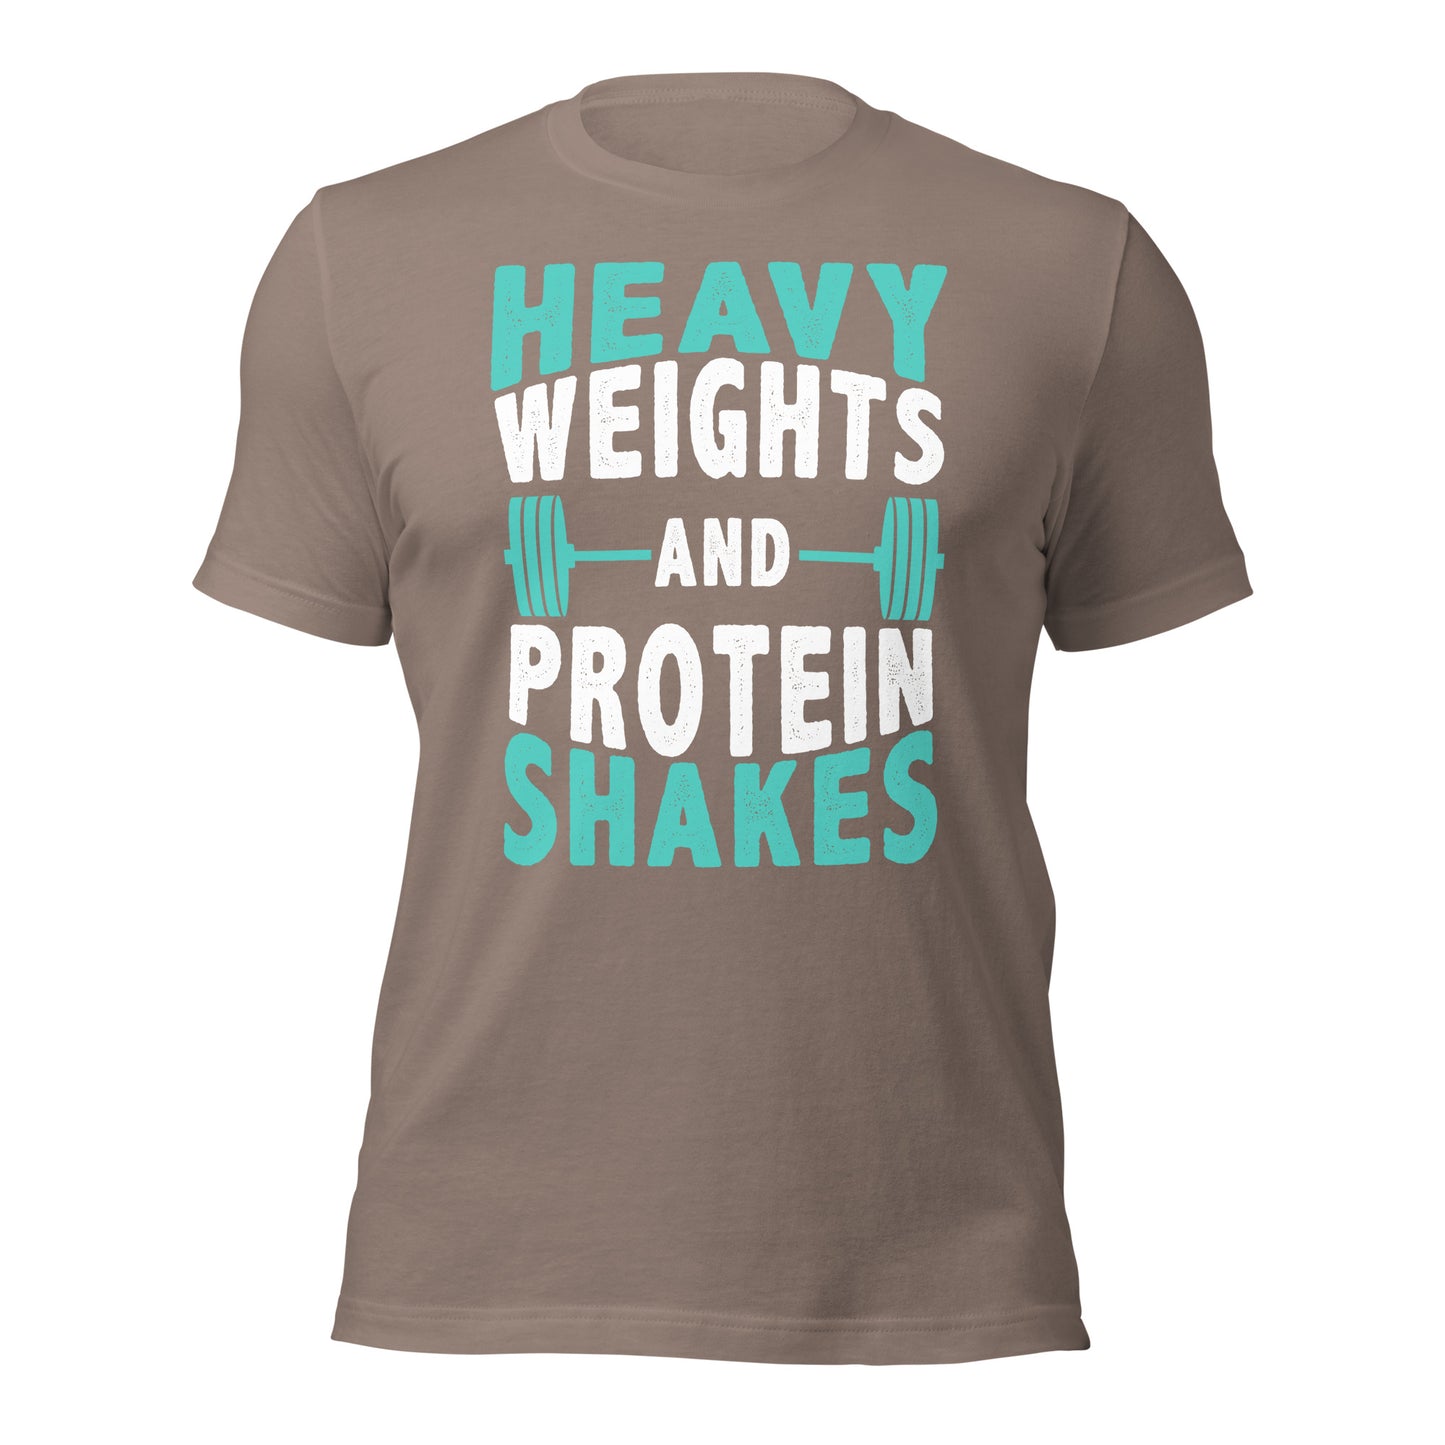 Heavy weights protein shakes tee pebble